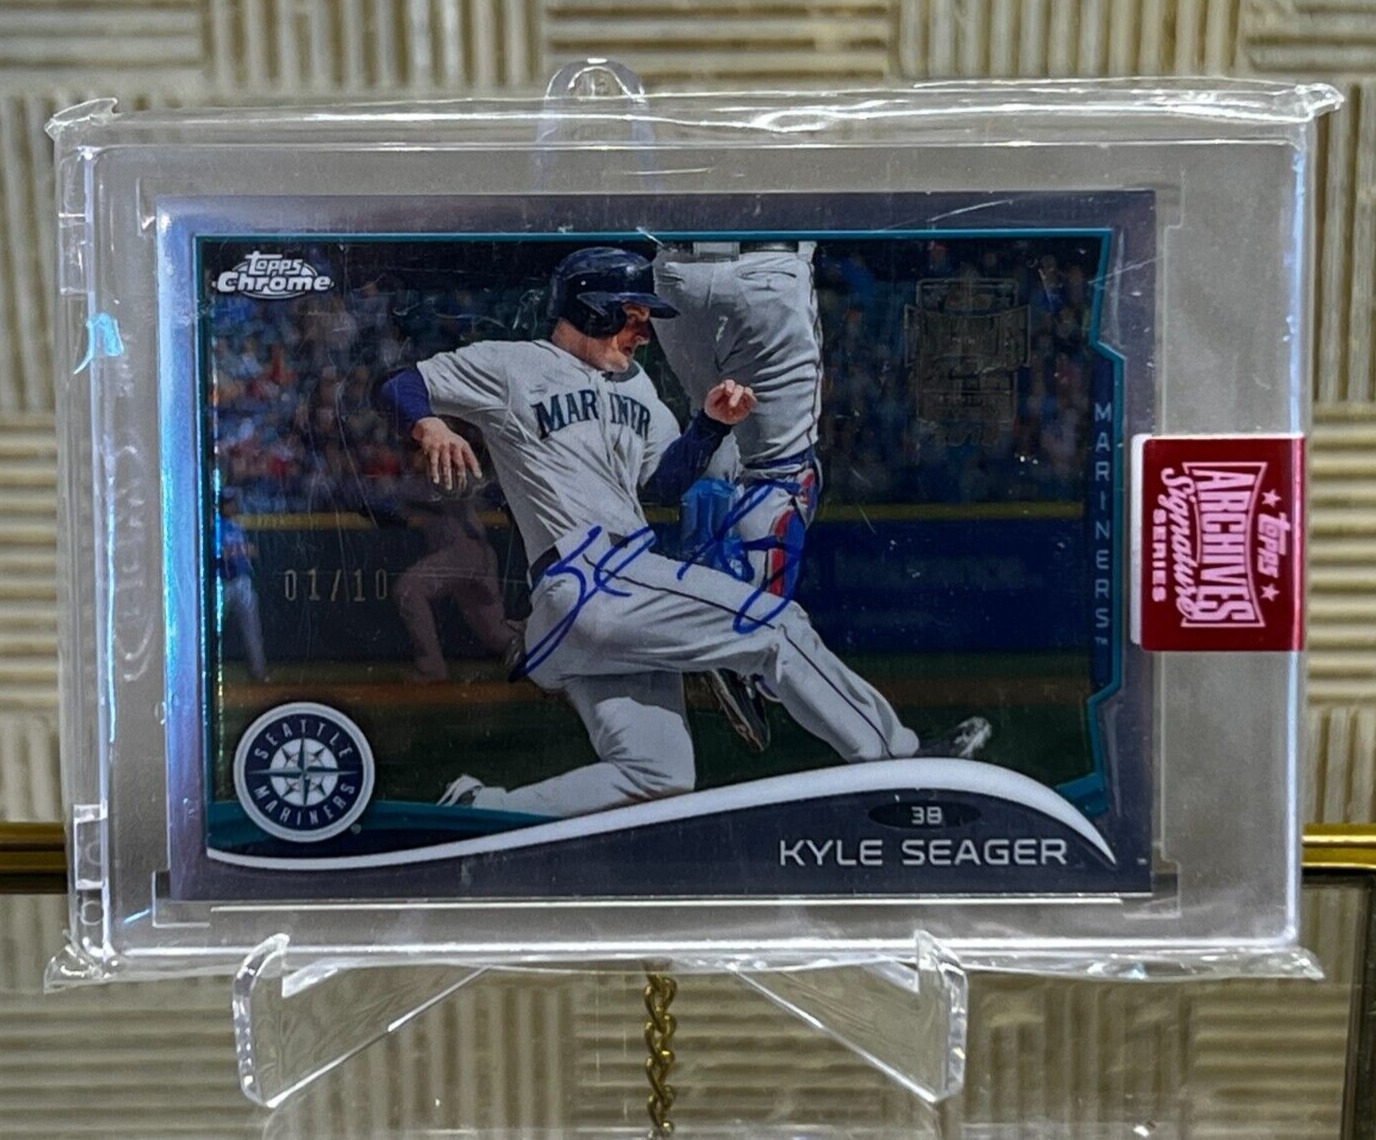 Kyle Seager 2019 Topps Archives Auto SSP ⚾️⚾️⚾️ 01/10 First One On Card Auto